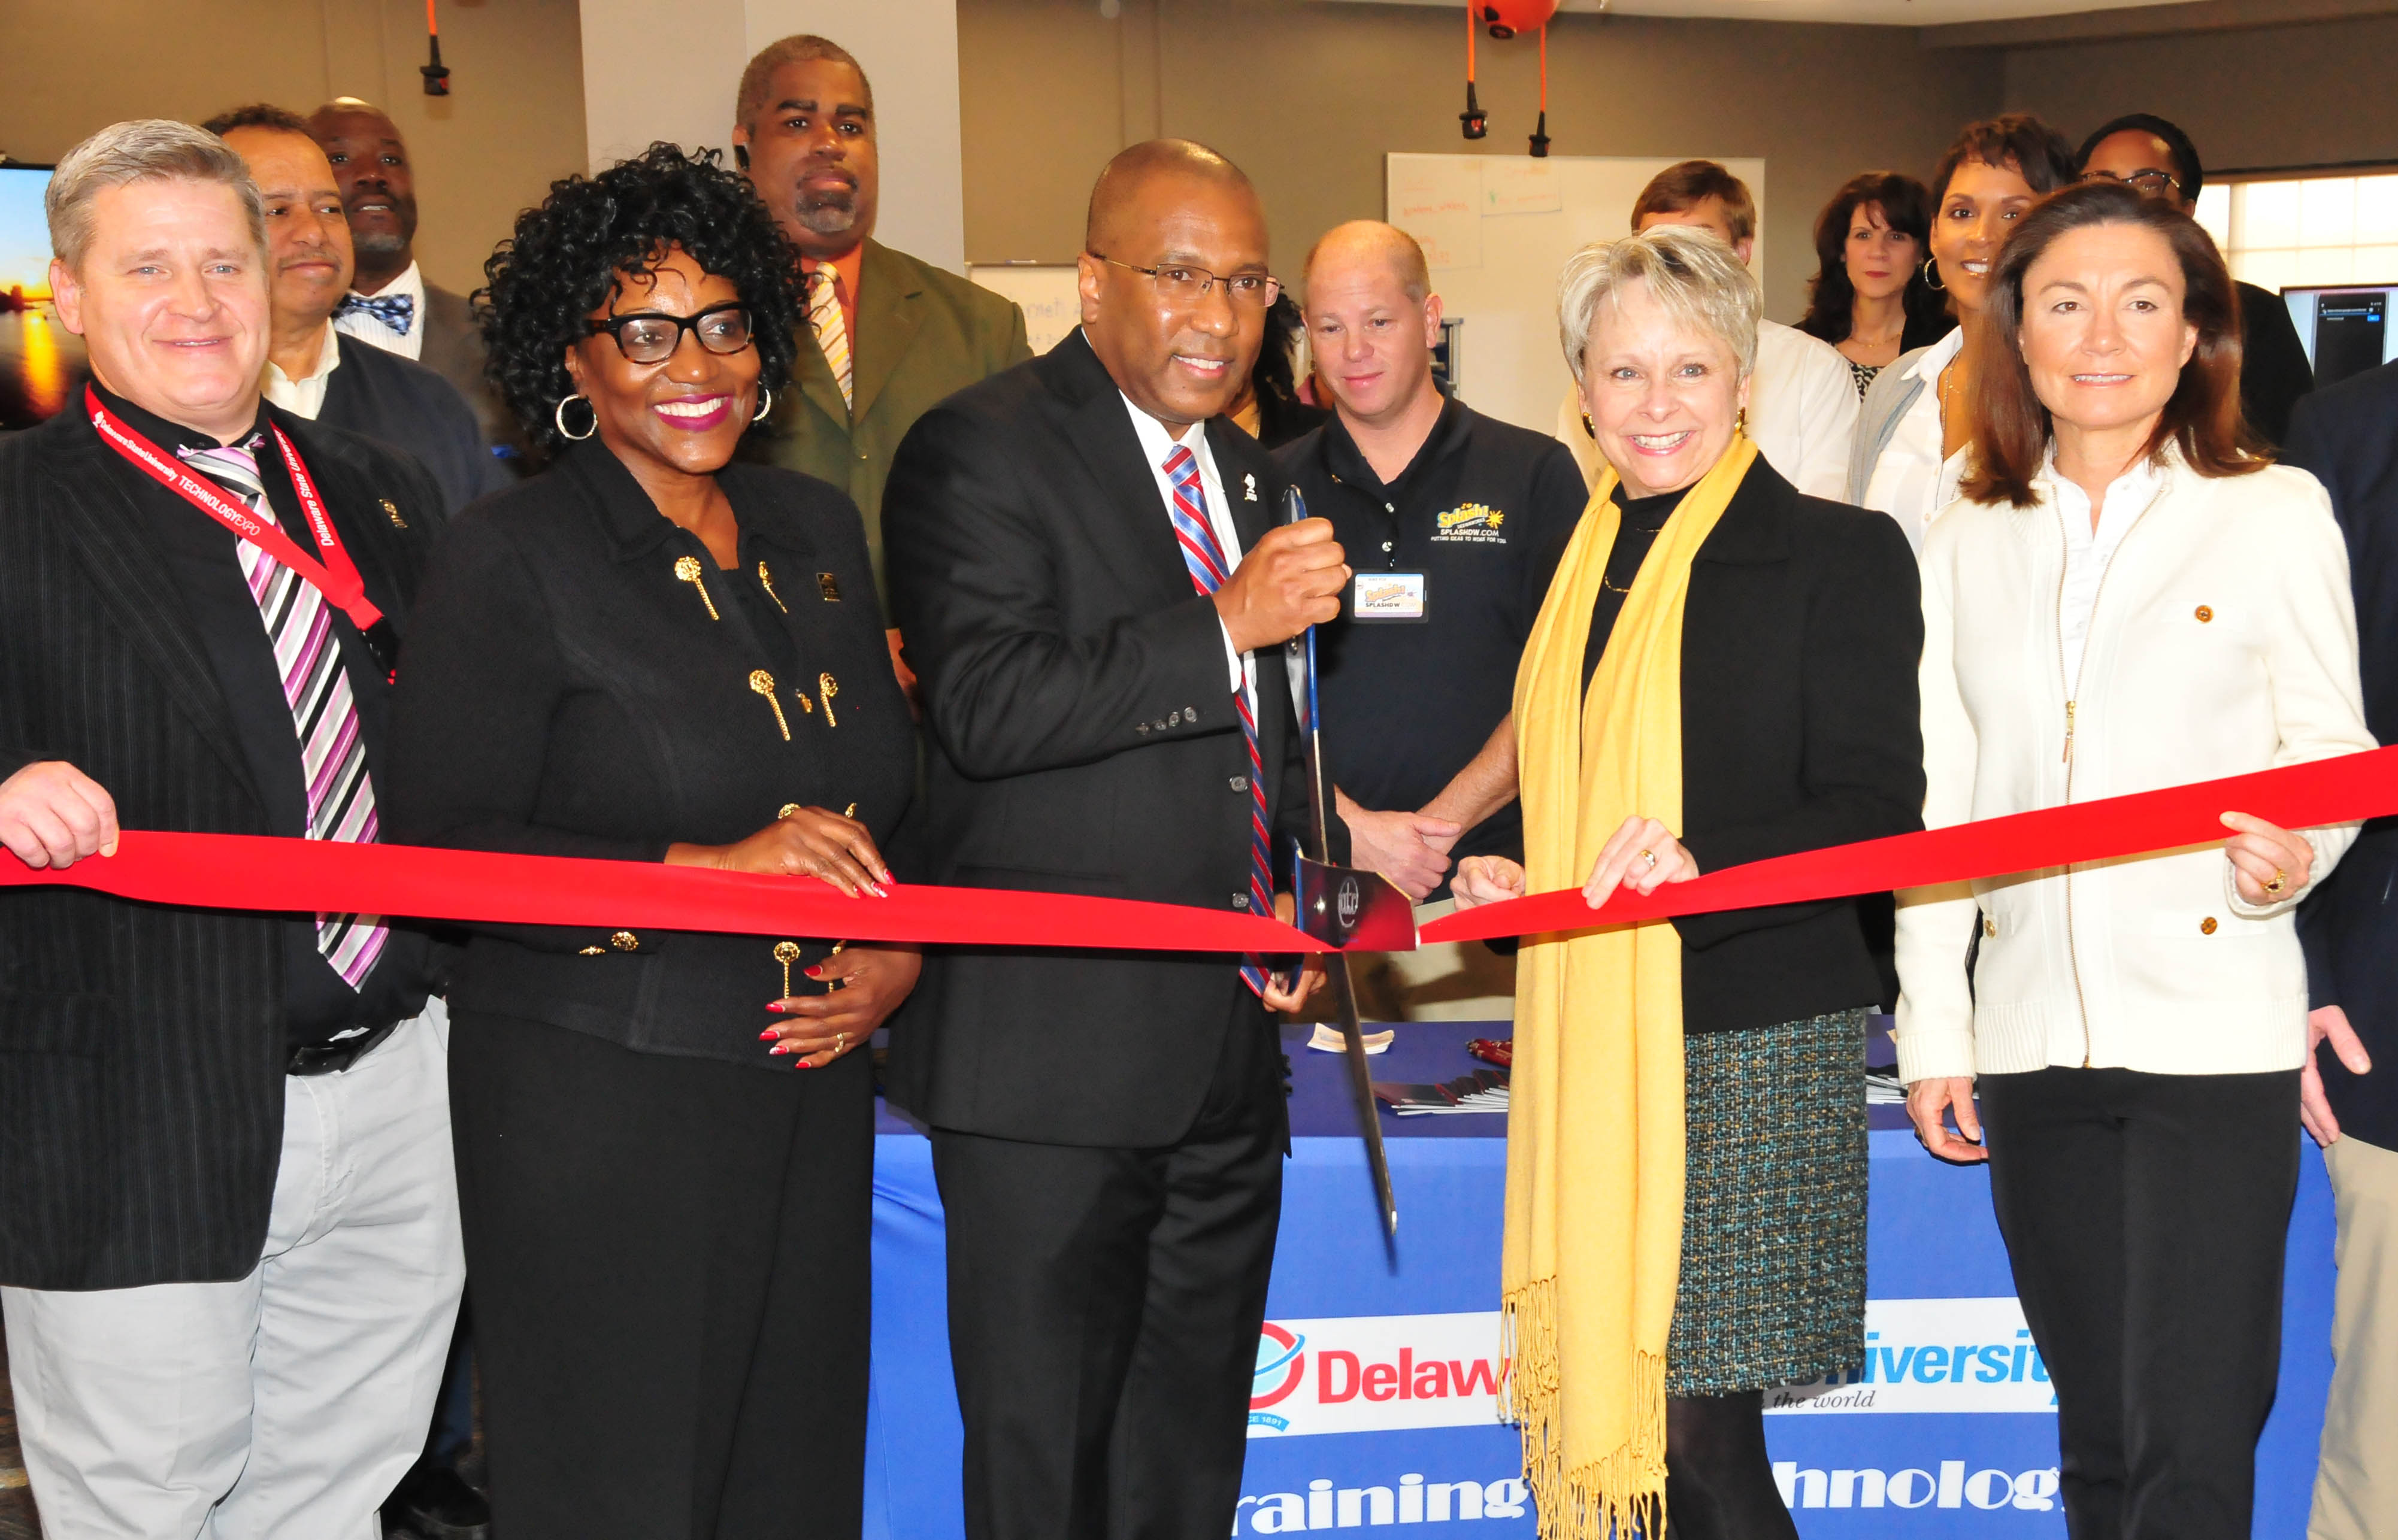 Ribbon Cutting Ceremony for the DSU Training and Technology Center – (L-r) Dee Myers, DTTC director; Dr. Vita Pickrum, DSU vice president of Institutional Advancement; DSU President Harry L. Williams; Judy Diogo, president of the Central Delaware Chamber of Commerce and Jocelyn Stewart, Barclaycard U.S. senior director of Community Relations.